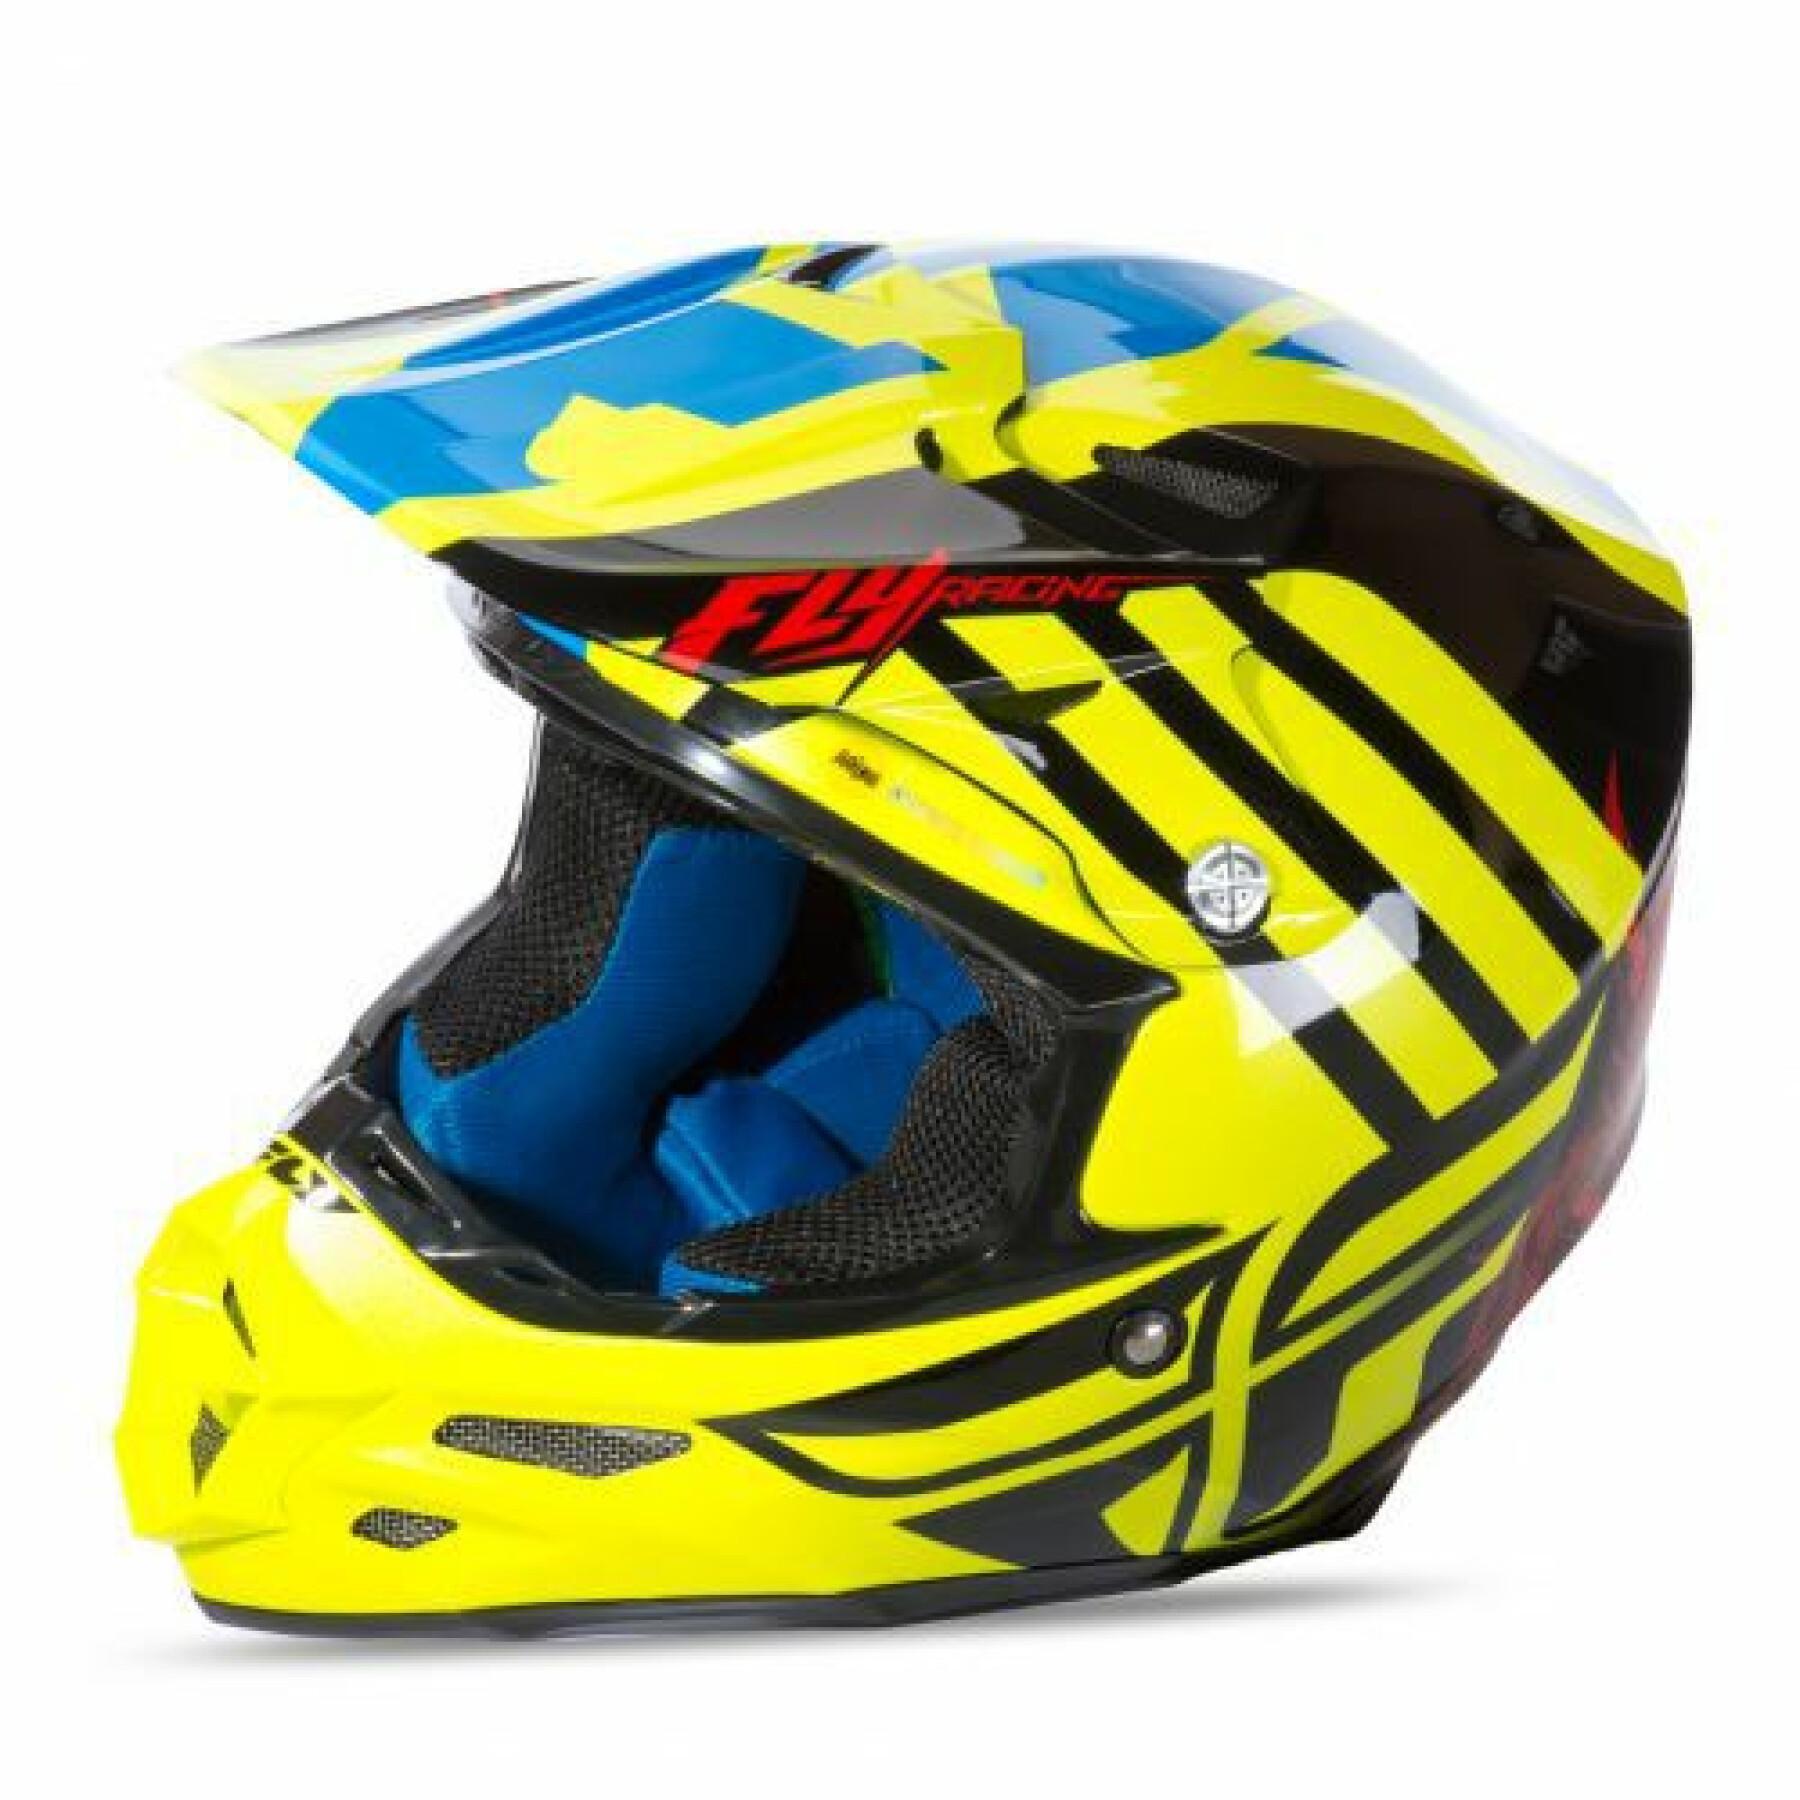 Auriculares Fly Racing F2 Carbon Replica Weston Peick 2017